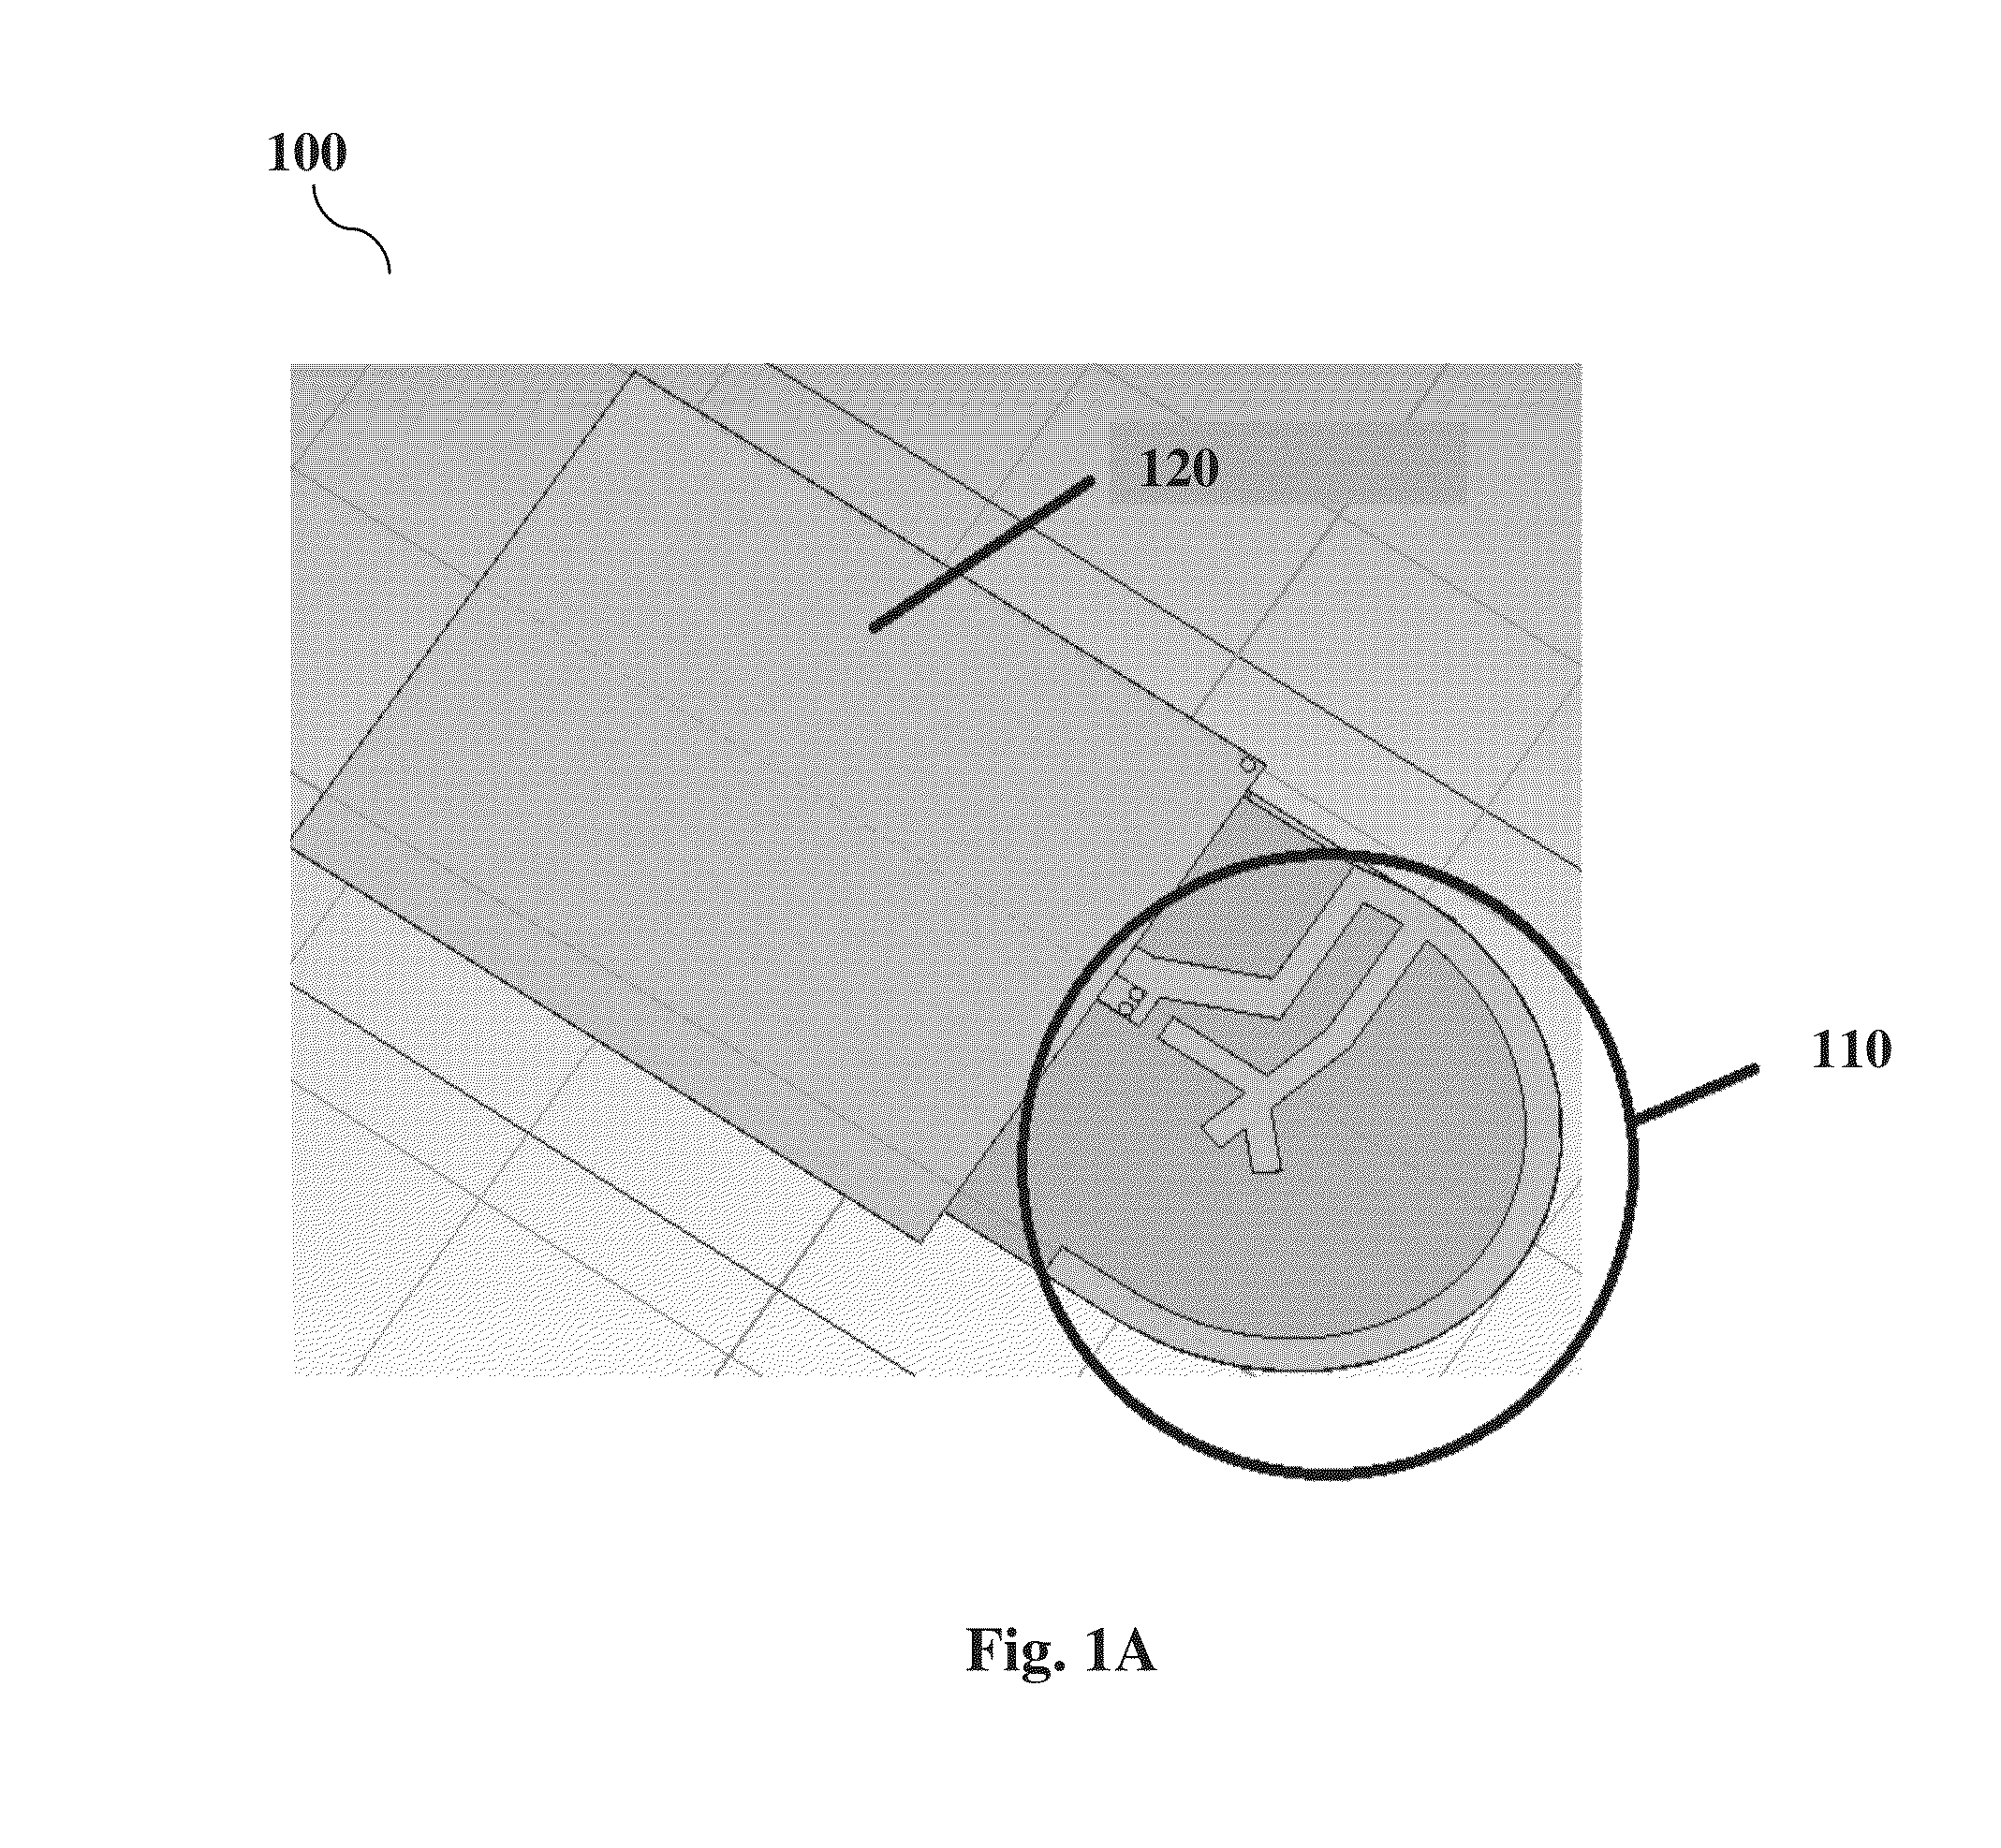 Antenna having a reflector for improved efficiency, gain, and directivity